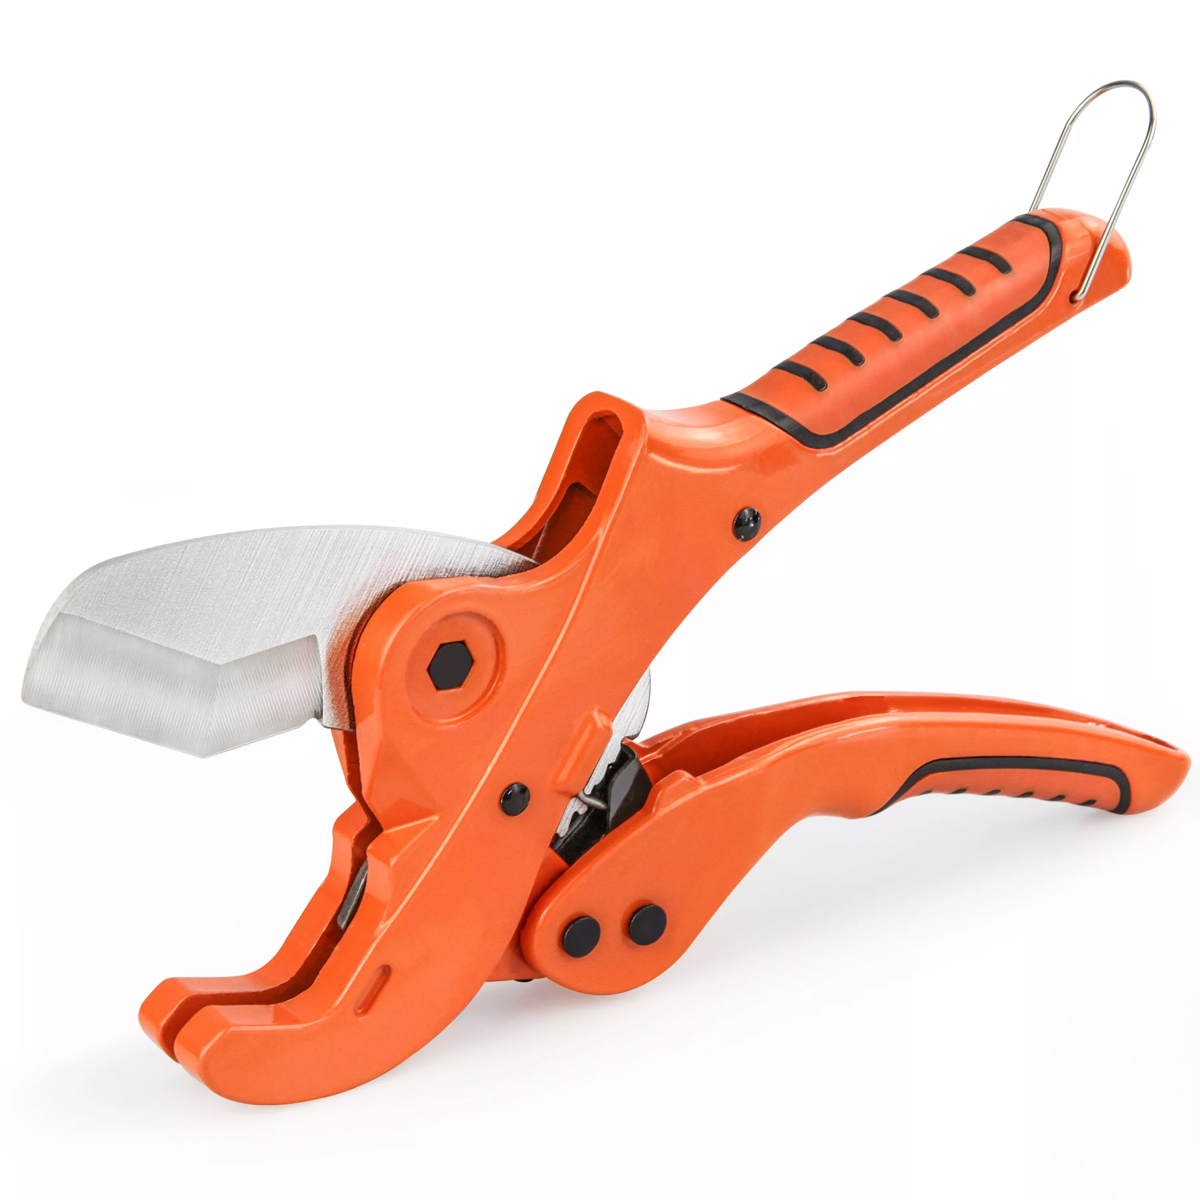 42mm Ratchet pipe cutter